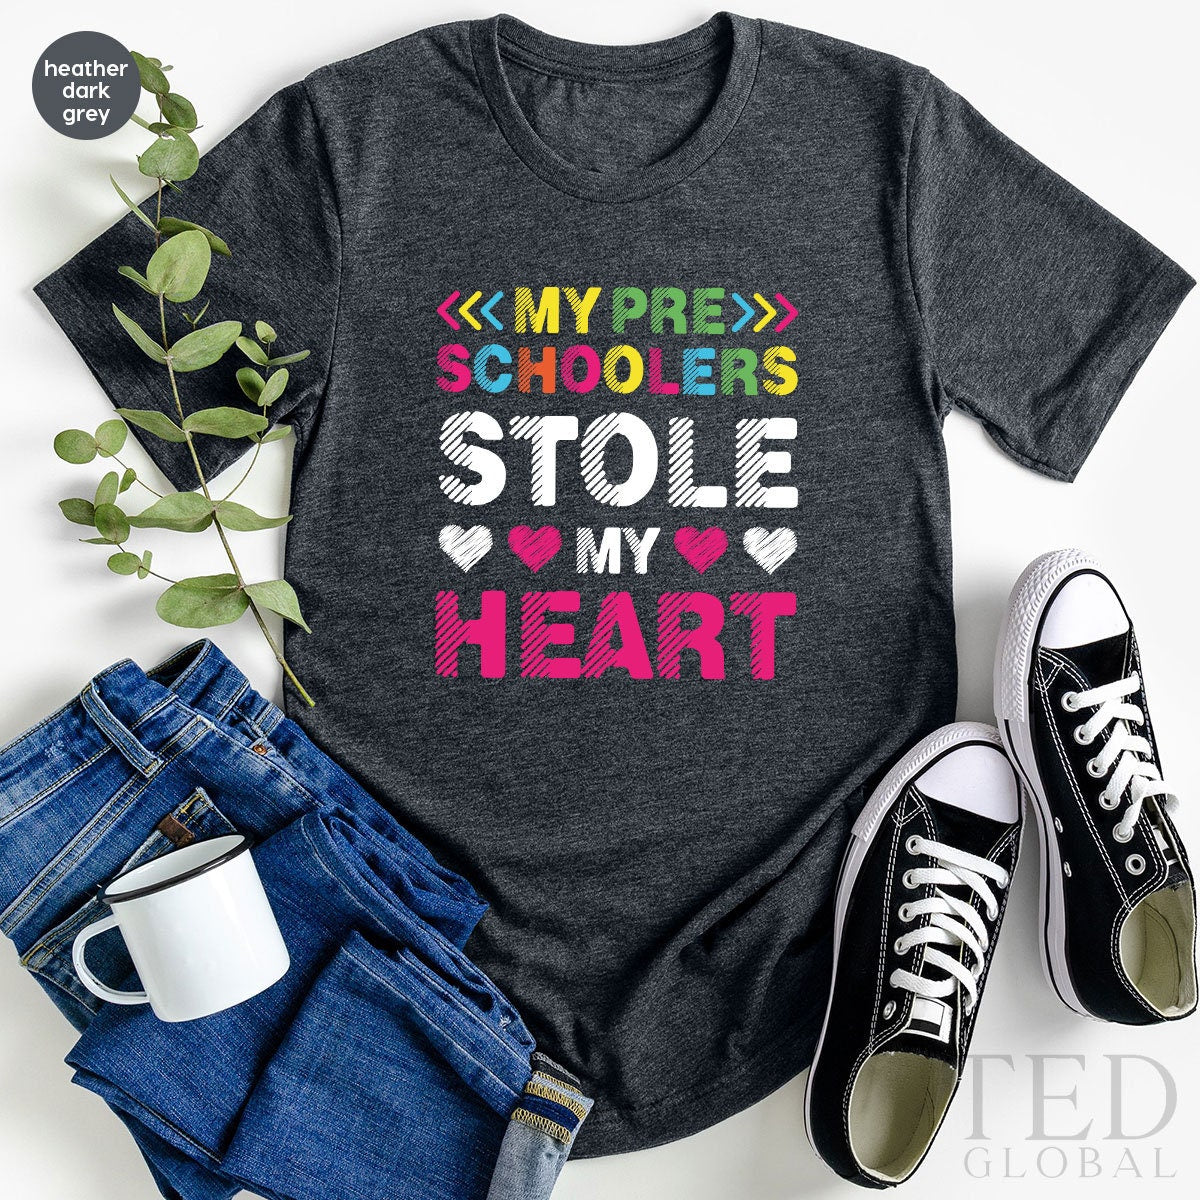 Books and Bling First Day of School' Kids' T-Shirt